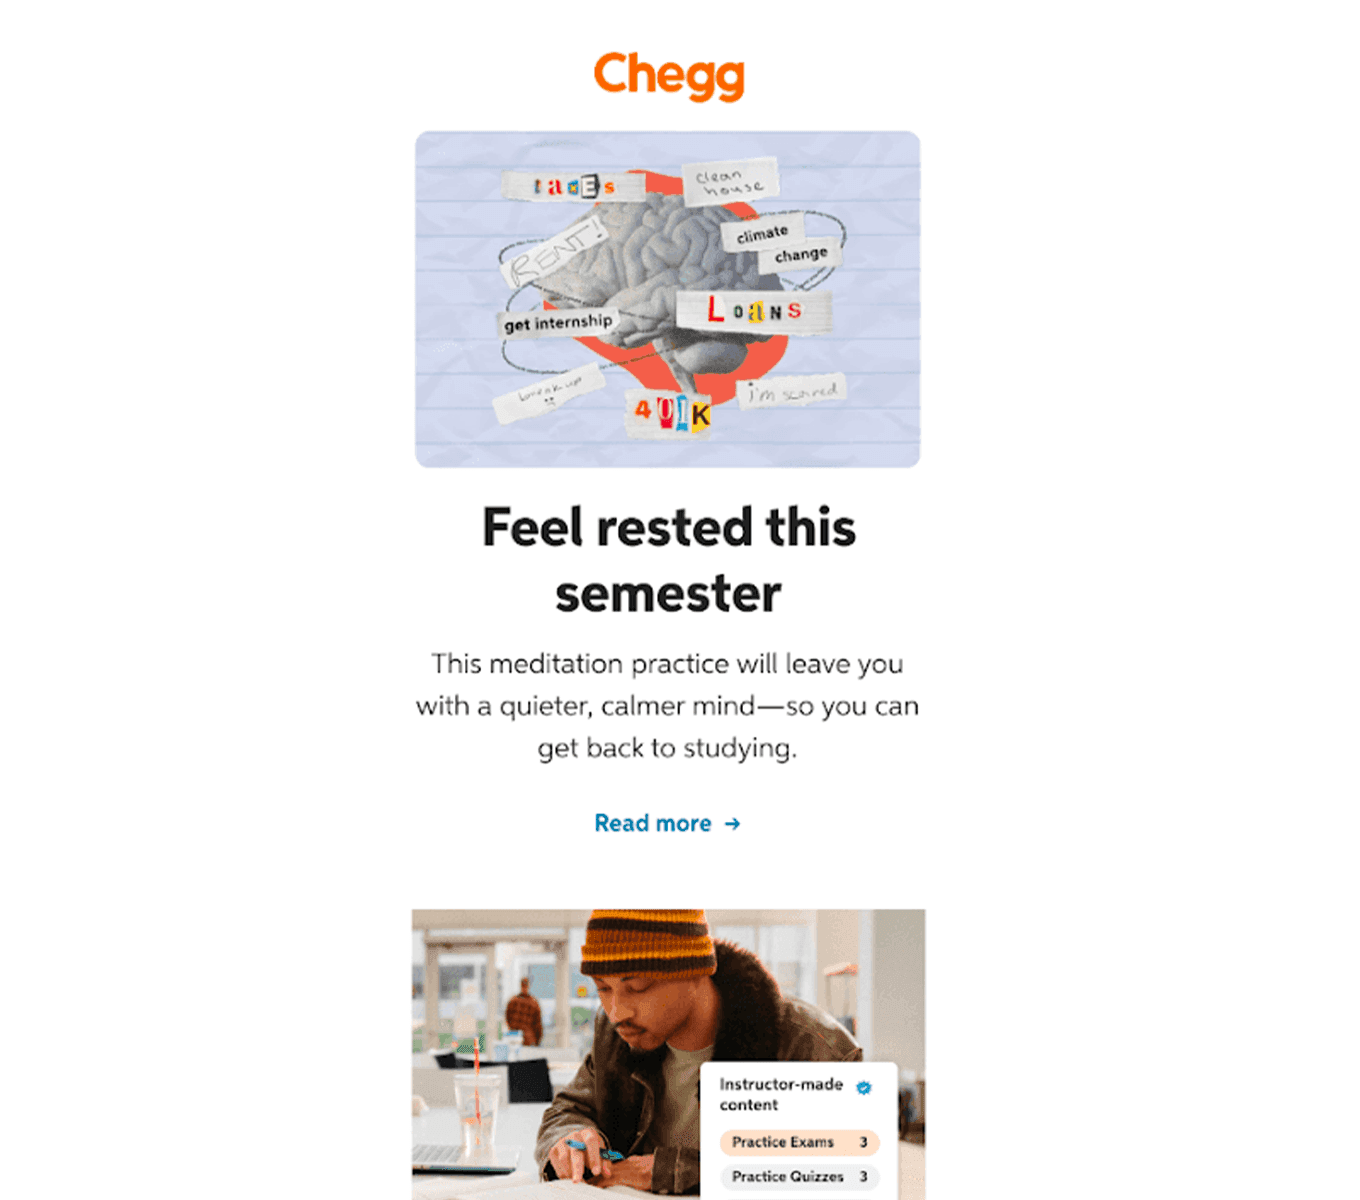 Chegg marketing emails to attract new customers to the product